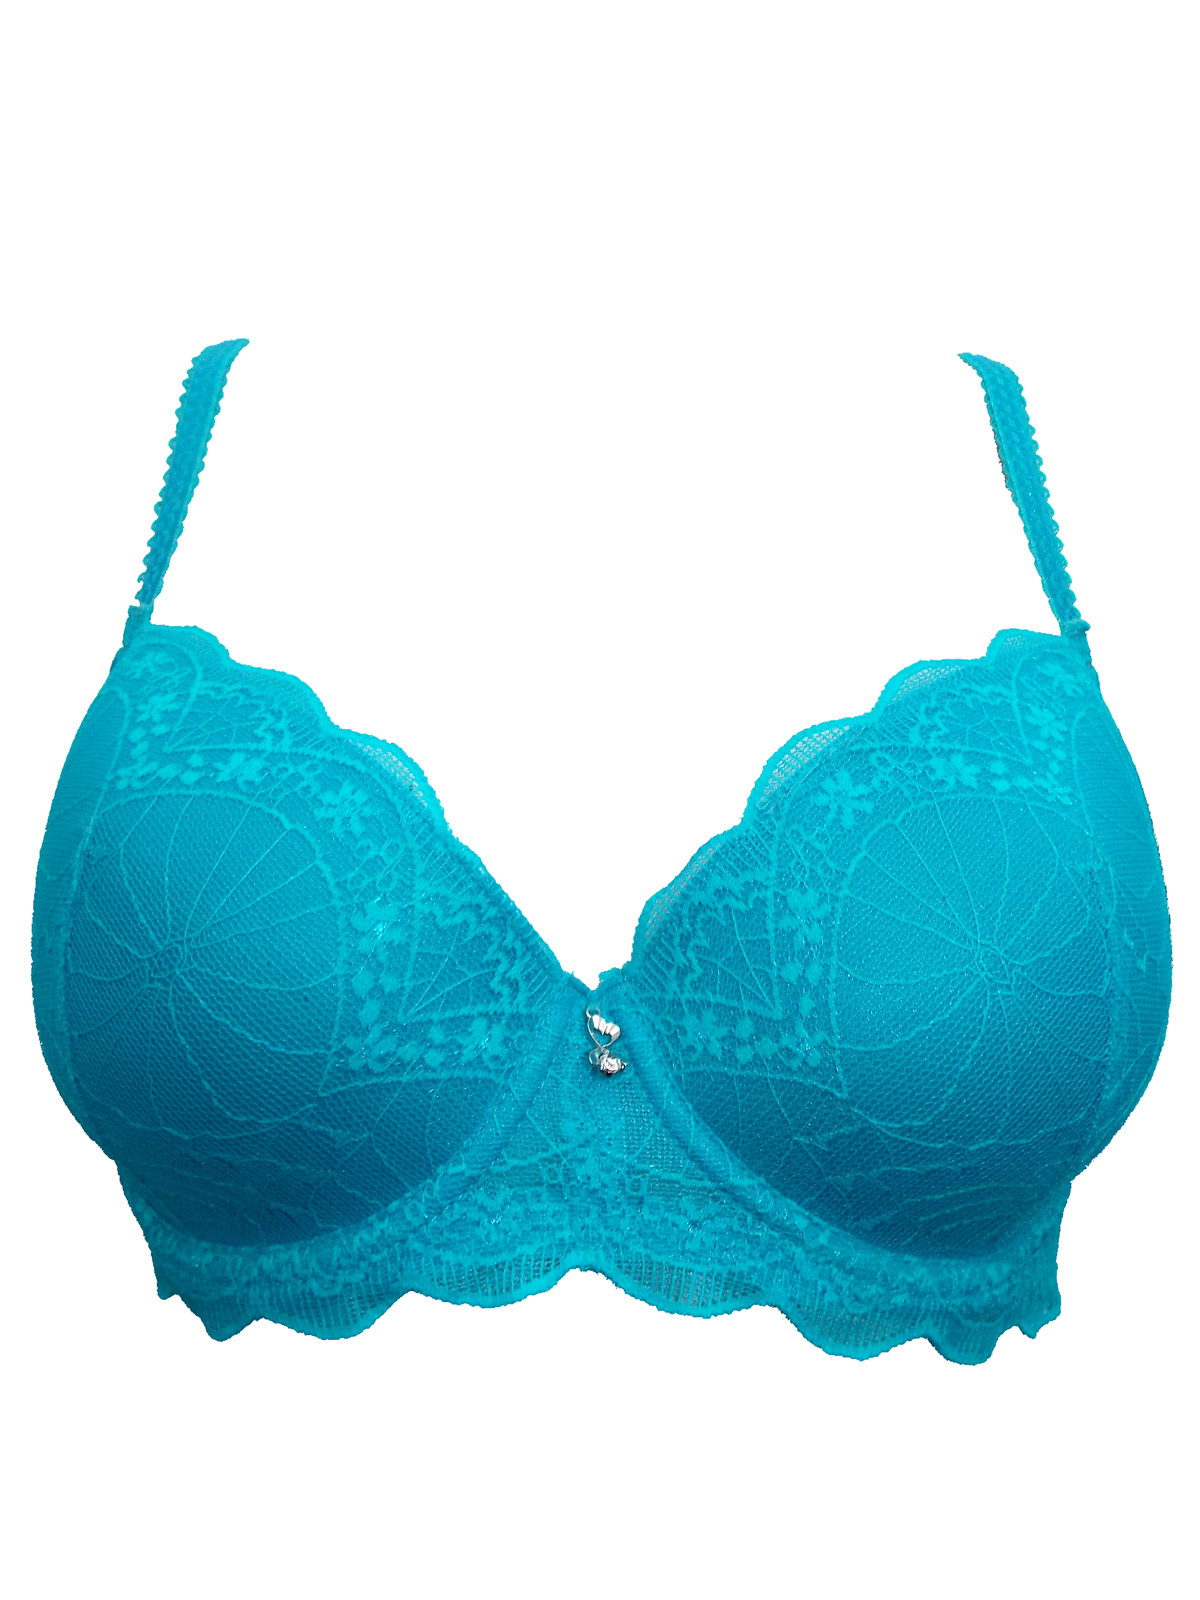 Cybele - - Cybele TURQUOISE Lace Overlay Underwired Padded Bra